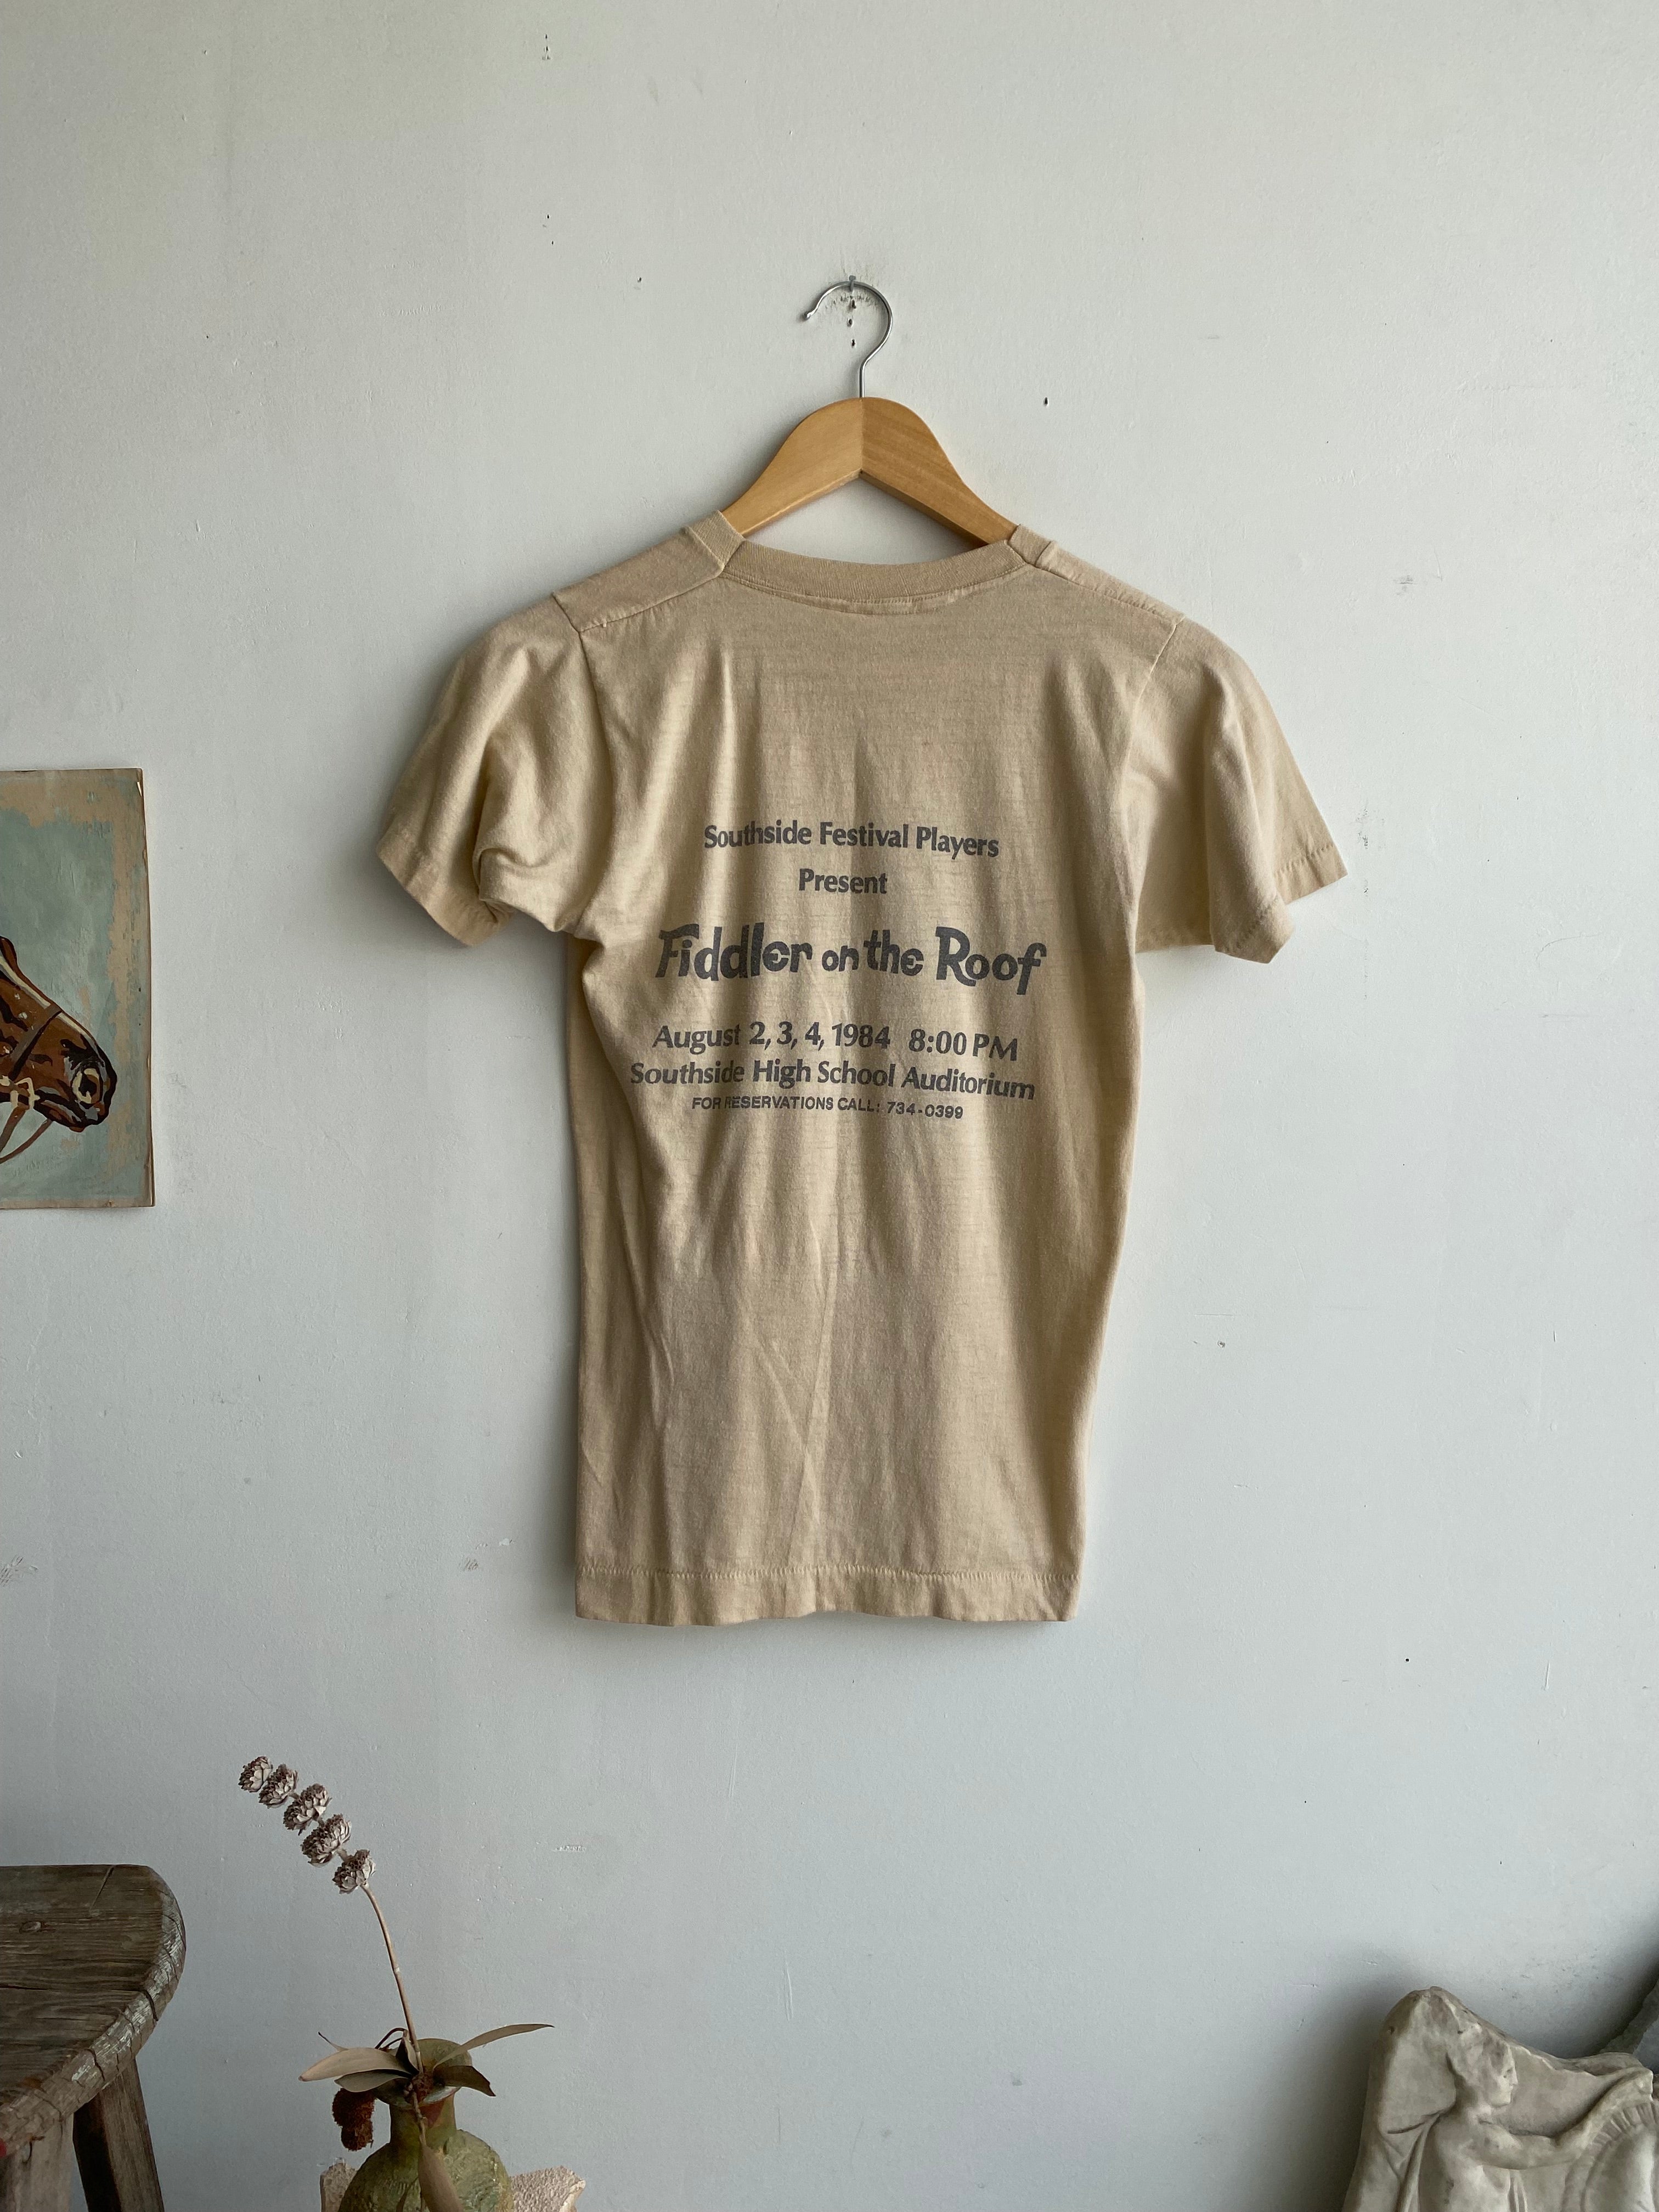 1980S "Fiddler on the Roof" Tee (S/M)